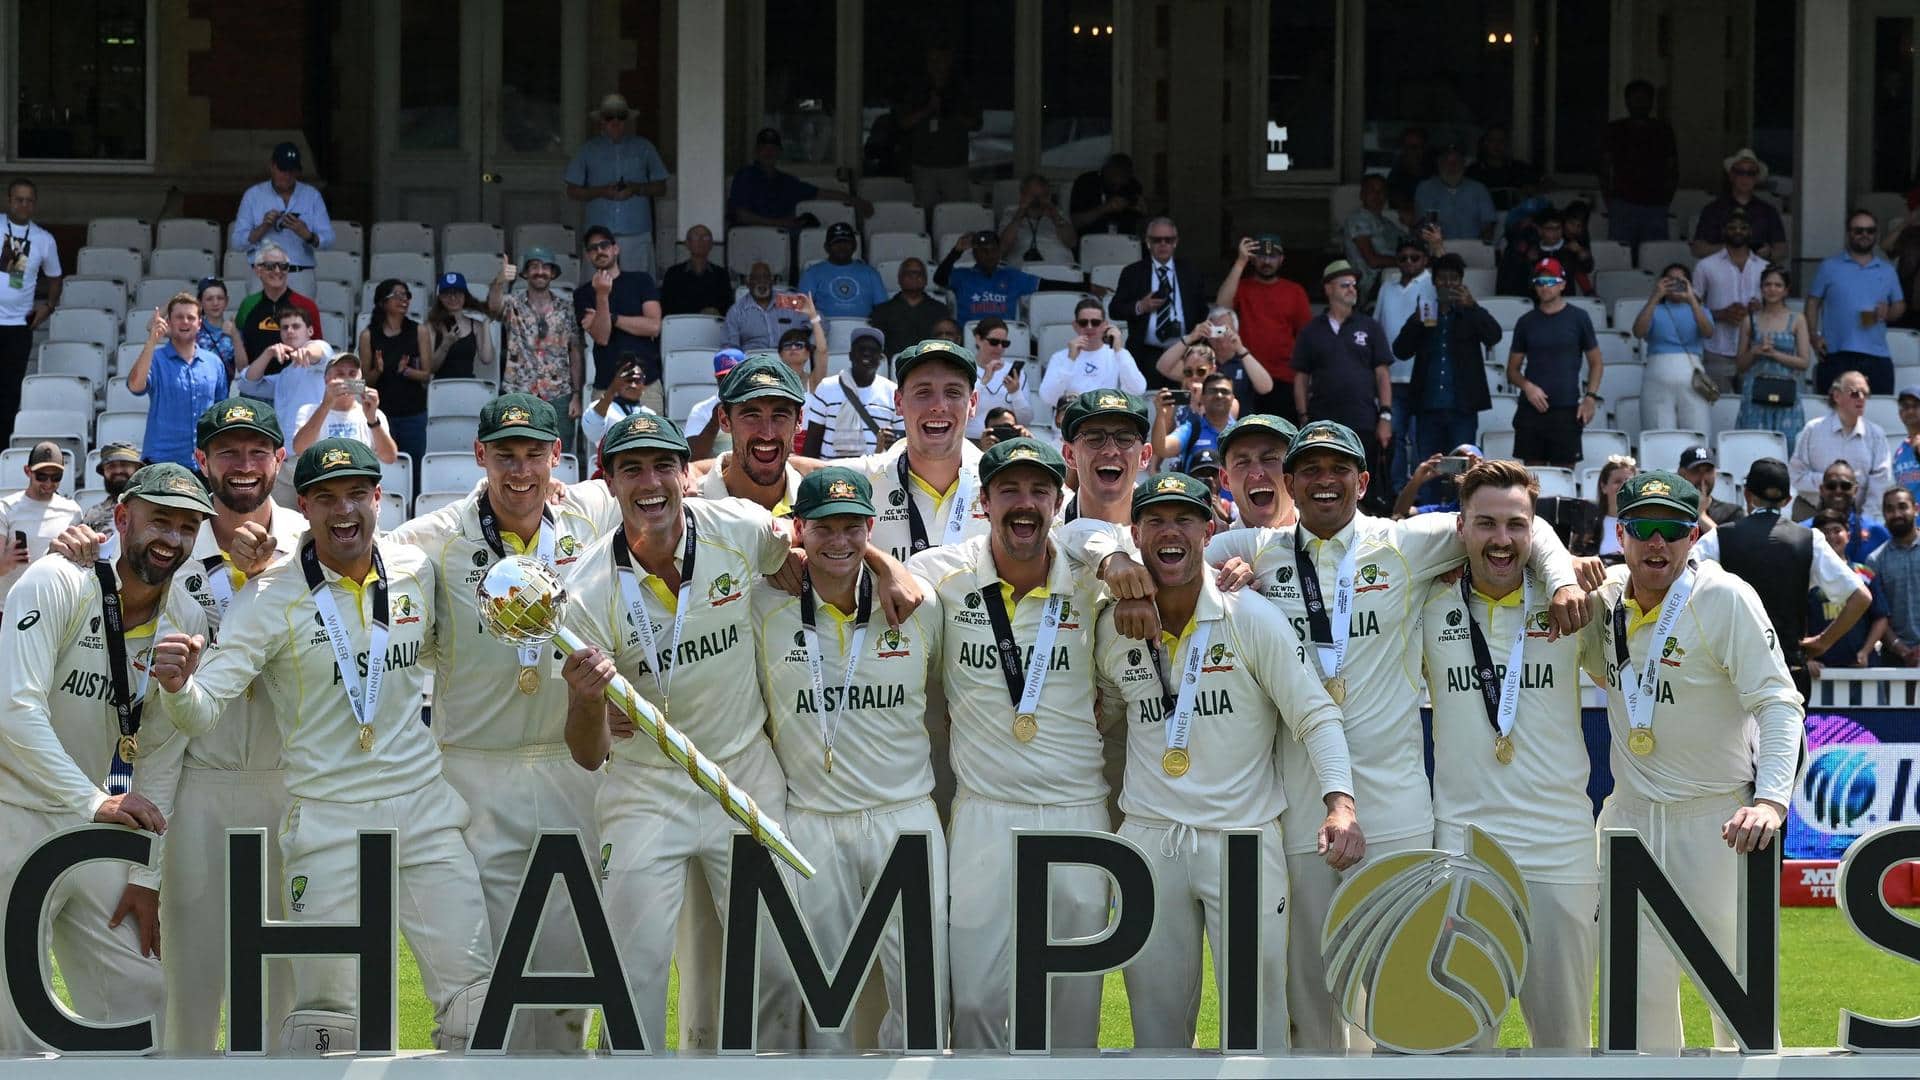 Australia own most ICC trophies: Here are the incredible numbers